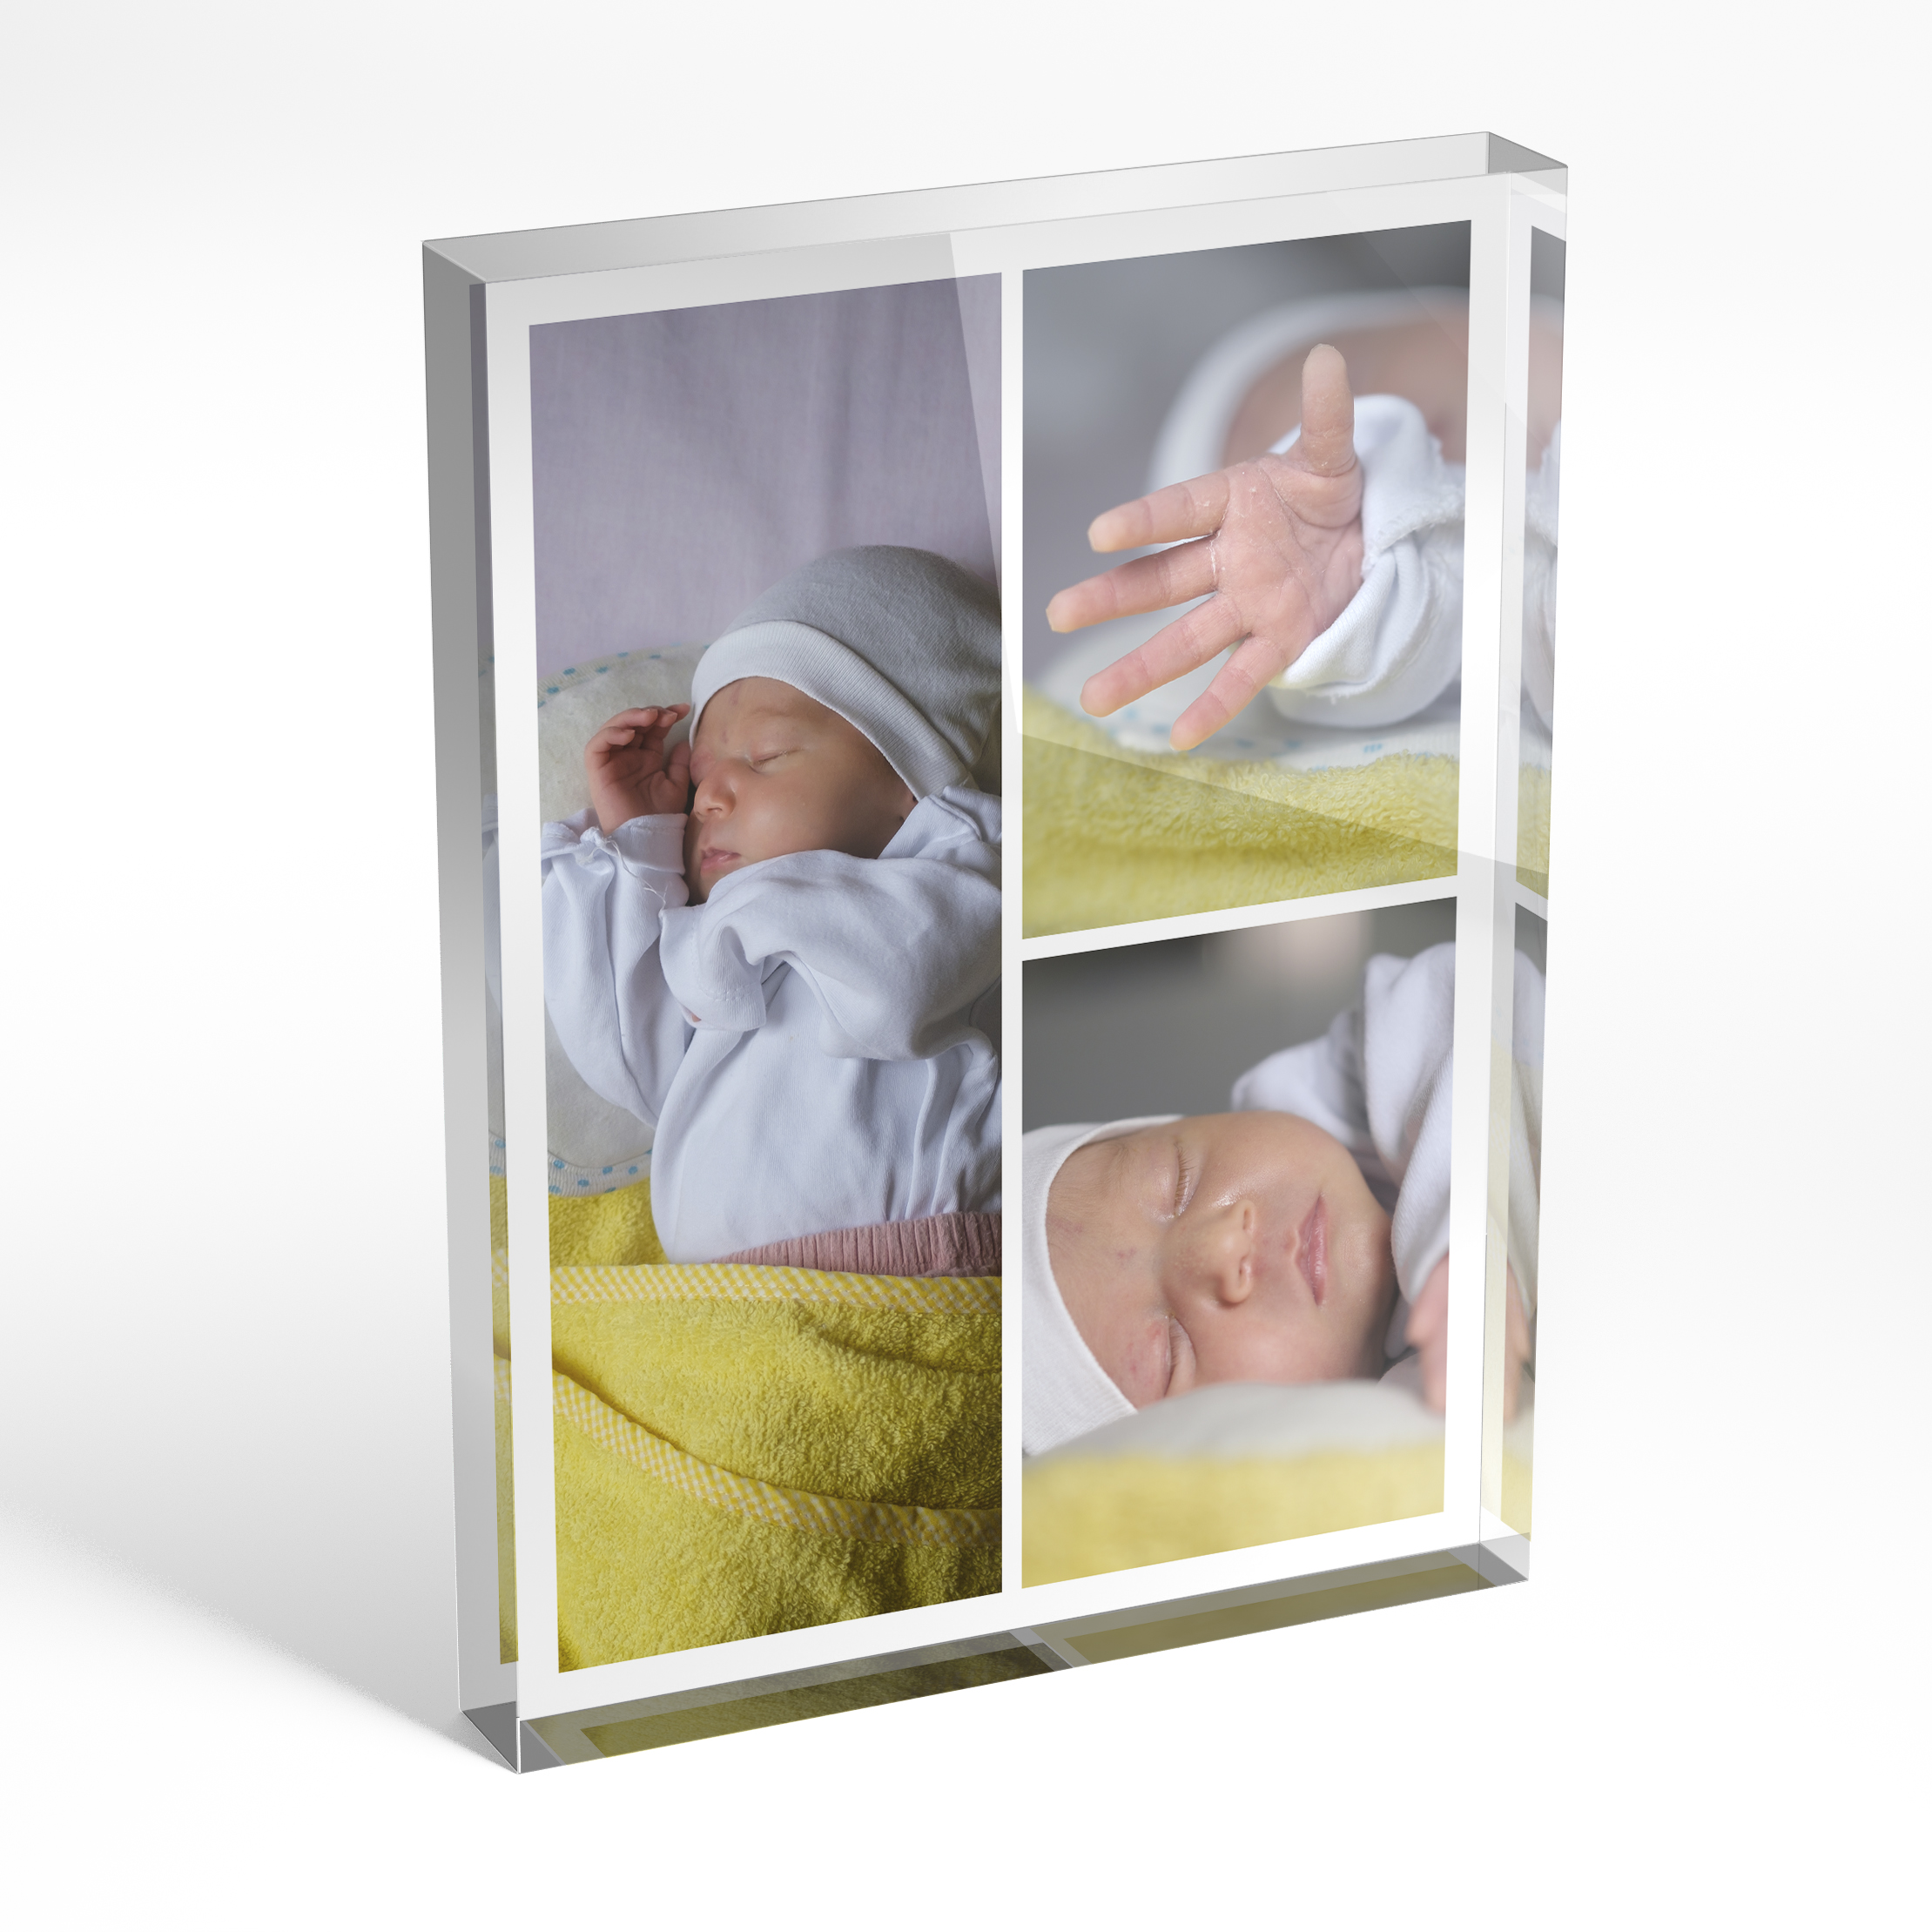 An angled side view of a portrait layout Acrylic Glass Photo Block with space for 3 photos. Thiis design is named "Cherished Child". 